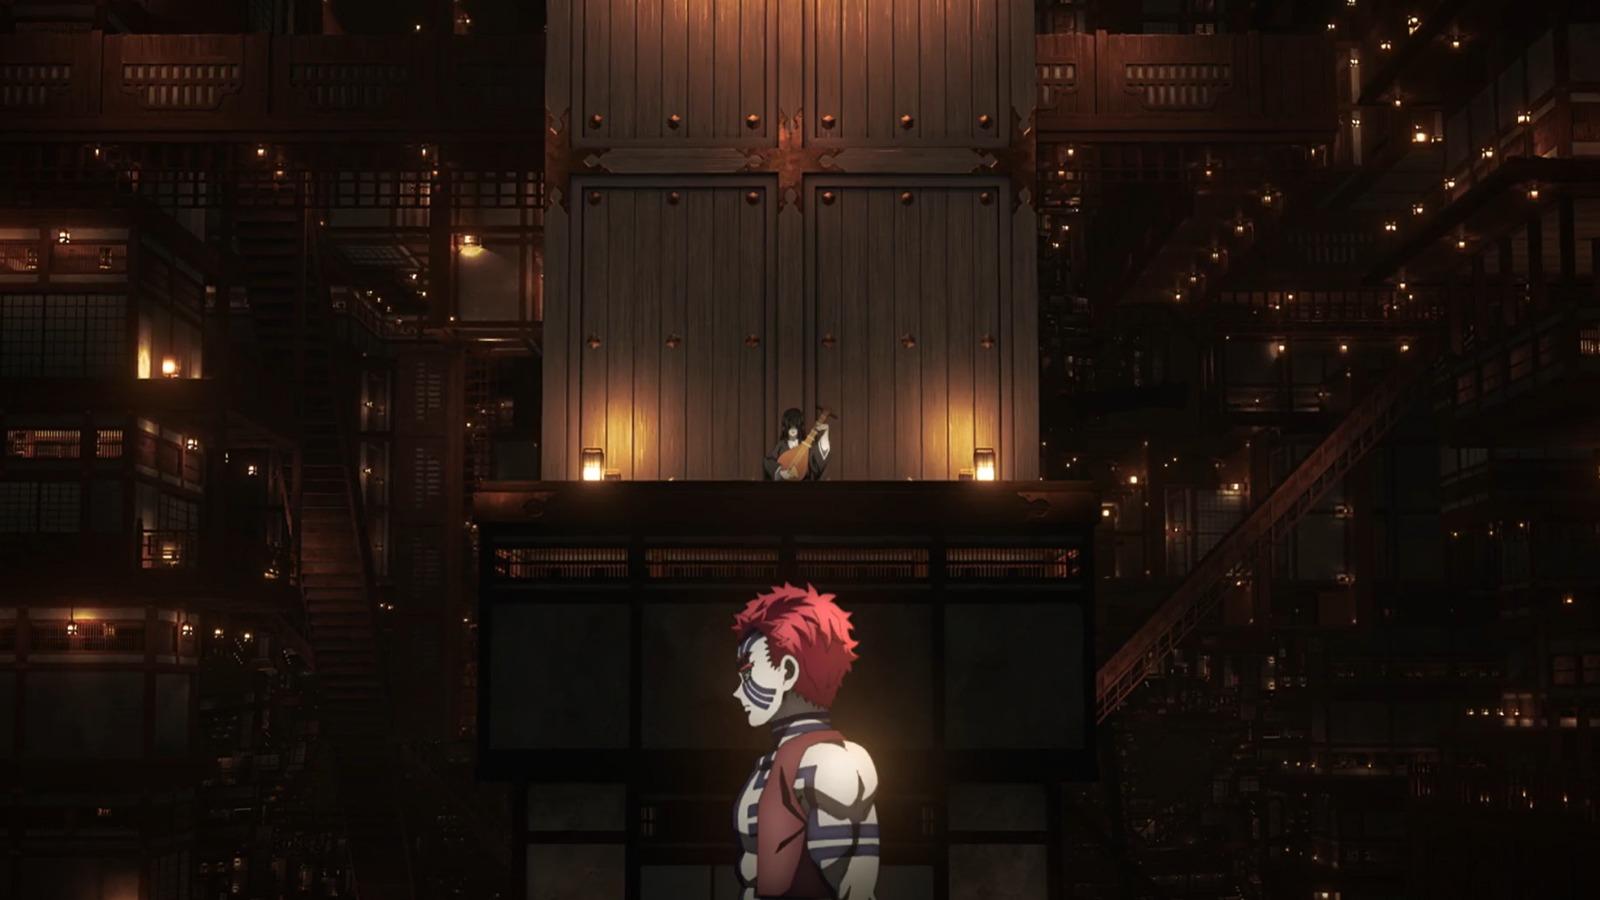 An image of the Infinity Castle in Demon Slayer